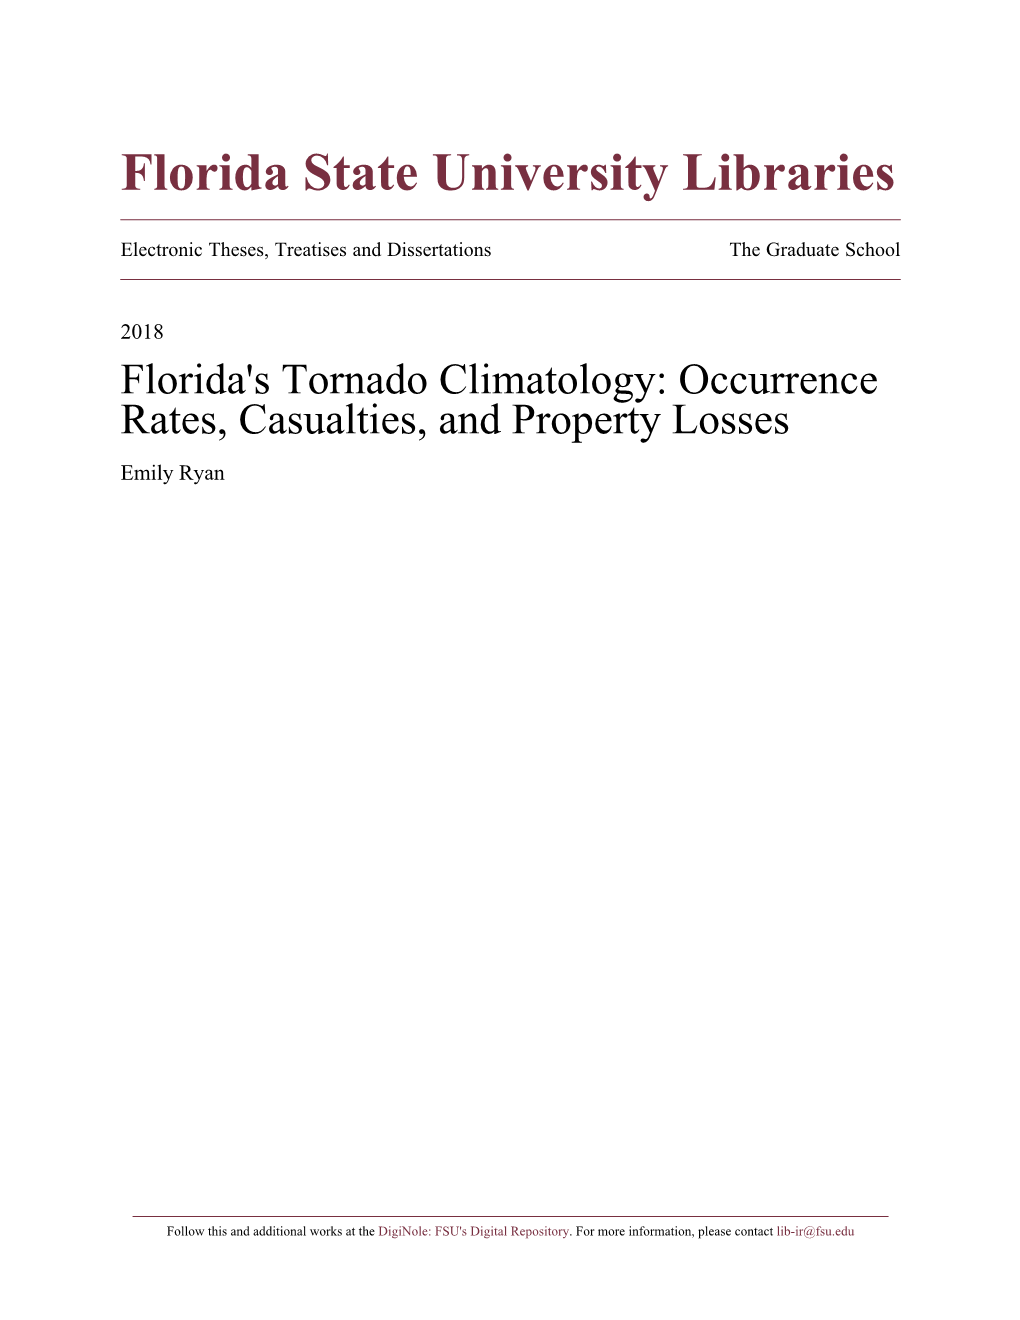 Florida's Tornado Climatology: Occurrence Rates, Casualties, and Property Losses Emily Ryan